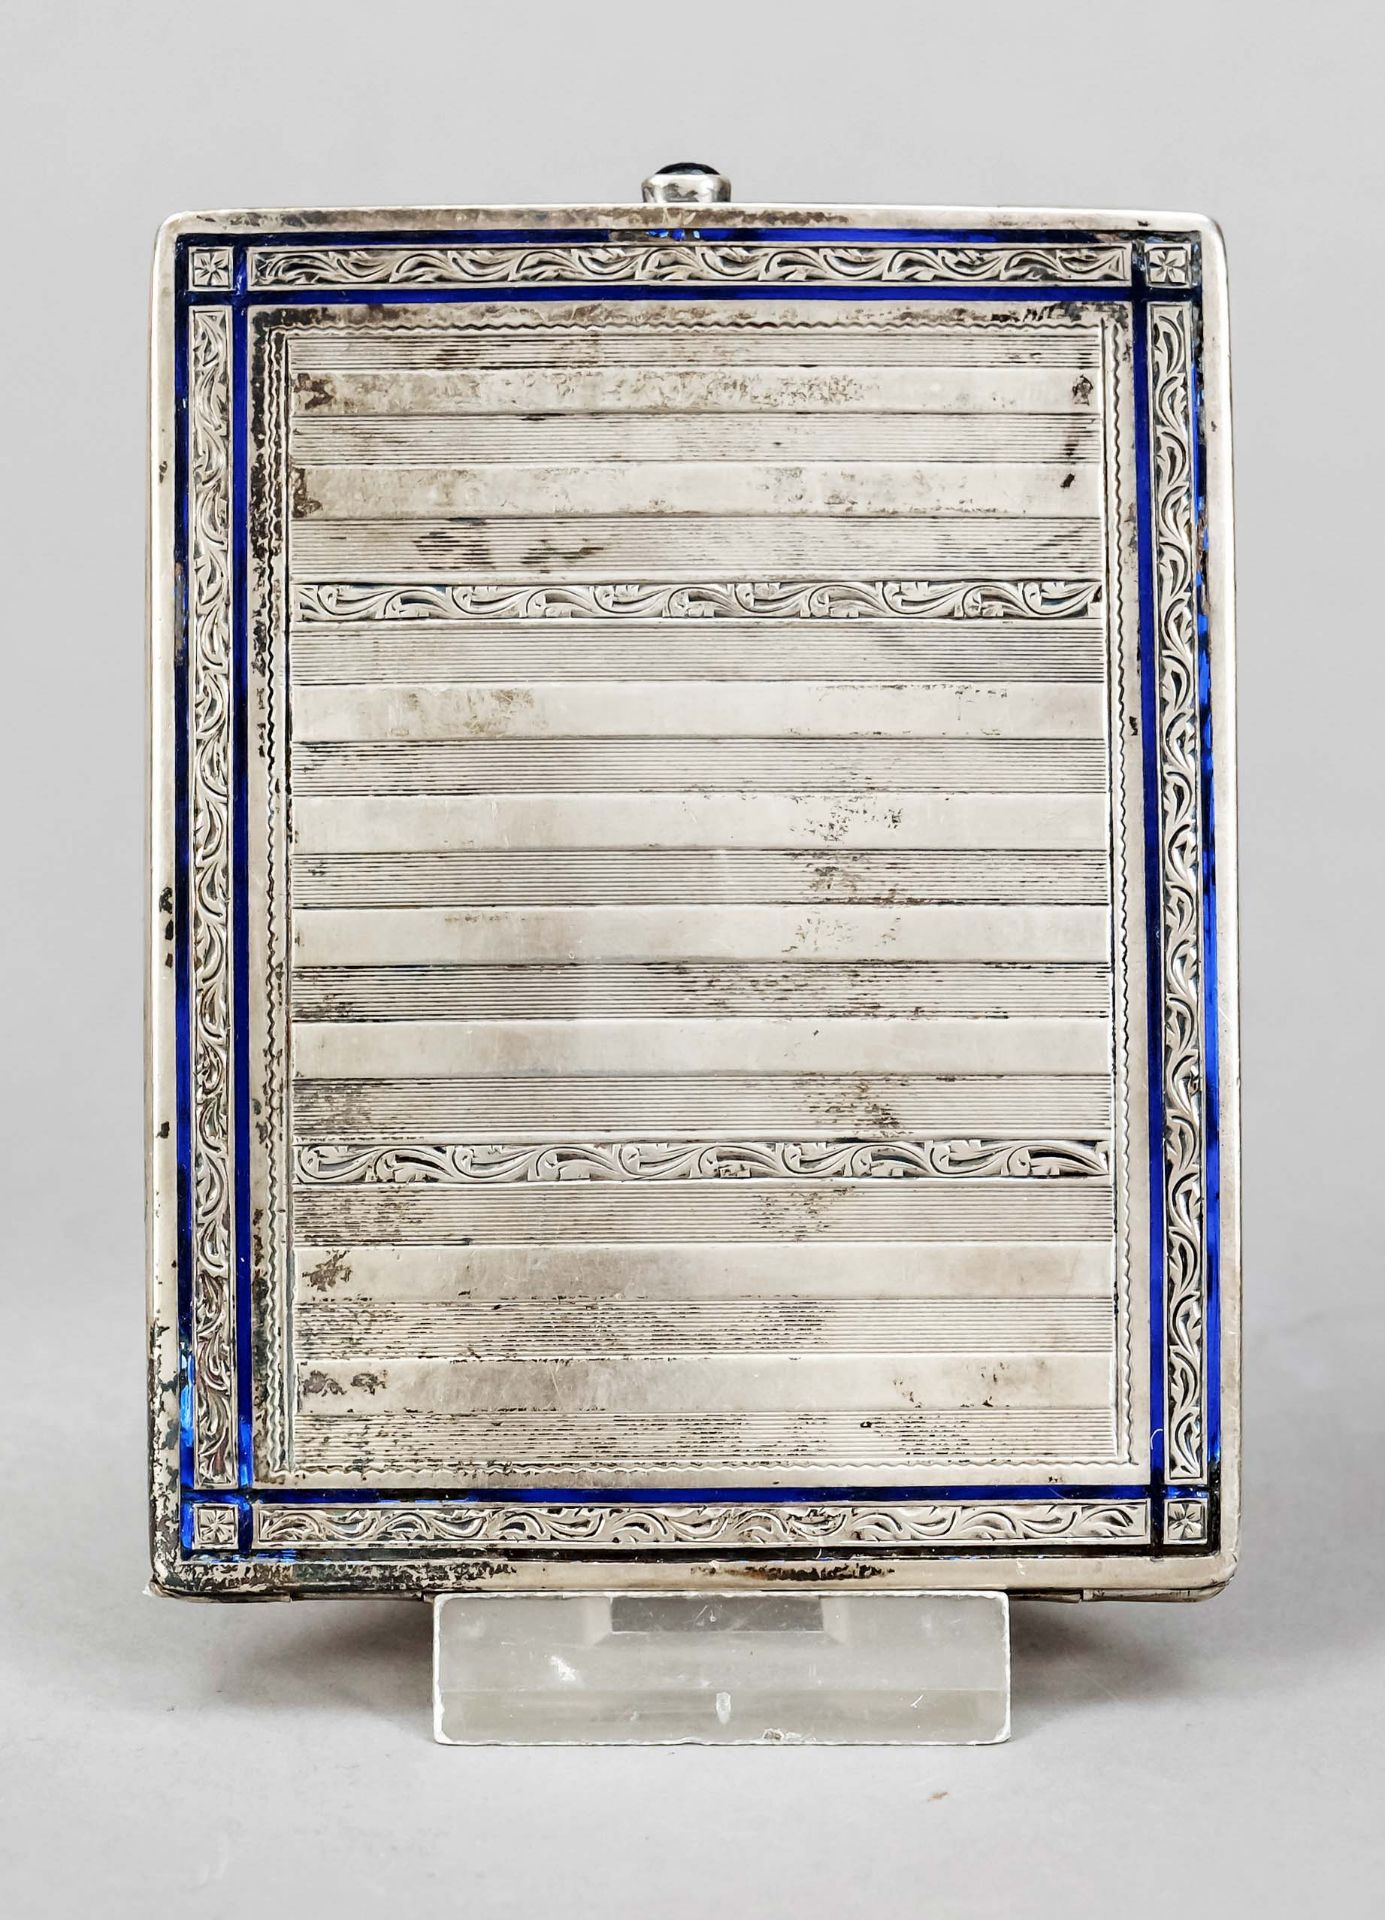 Rectangular cigarette case, 1st half of 20th century, silver 900/000, lid with engraved decoration